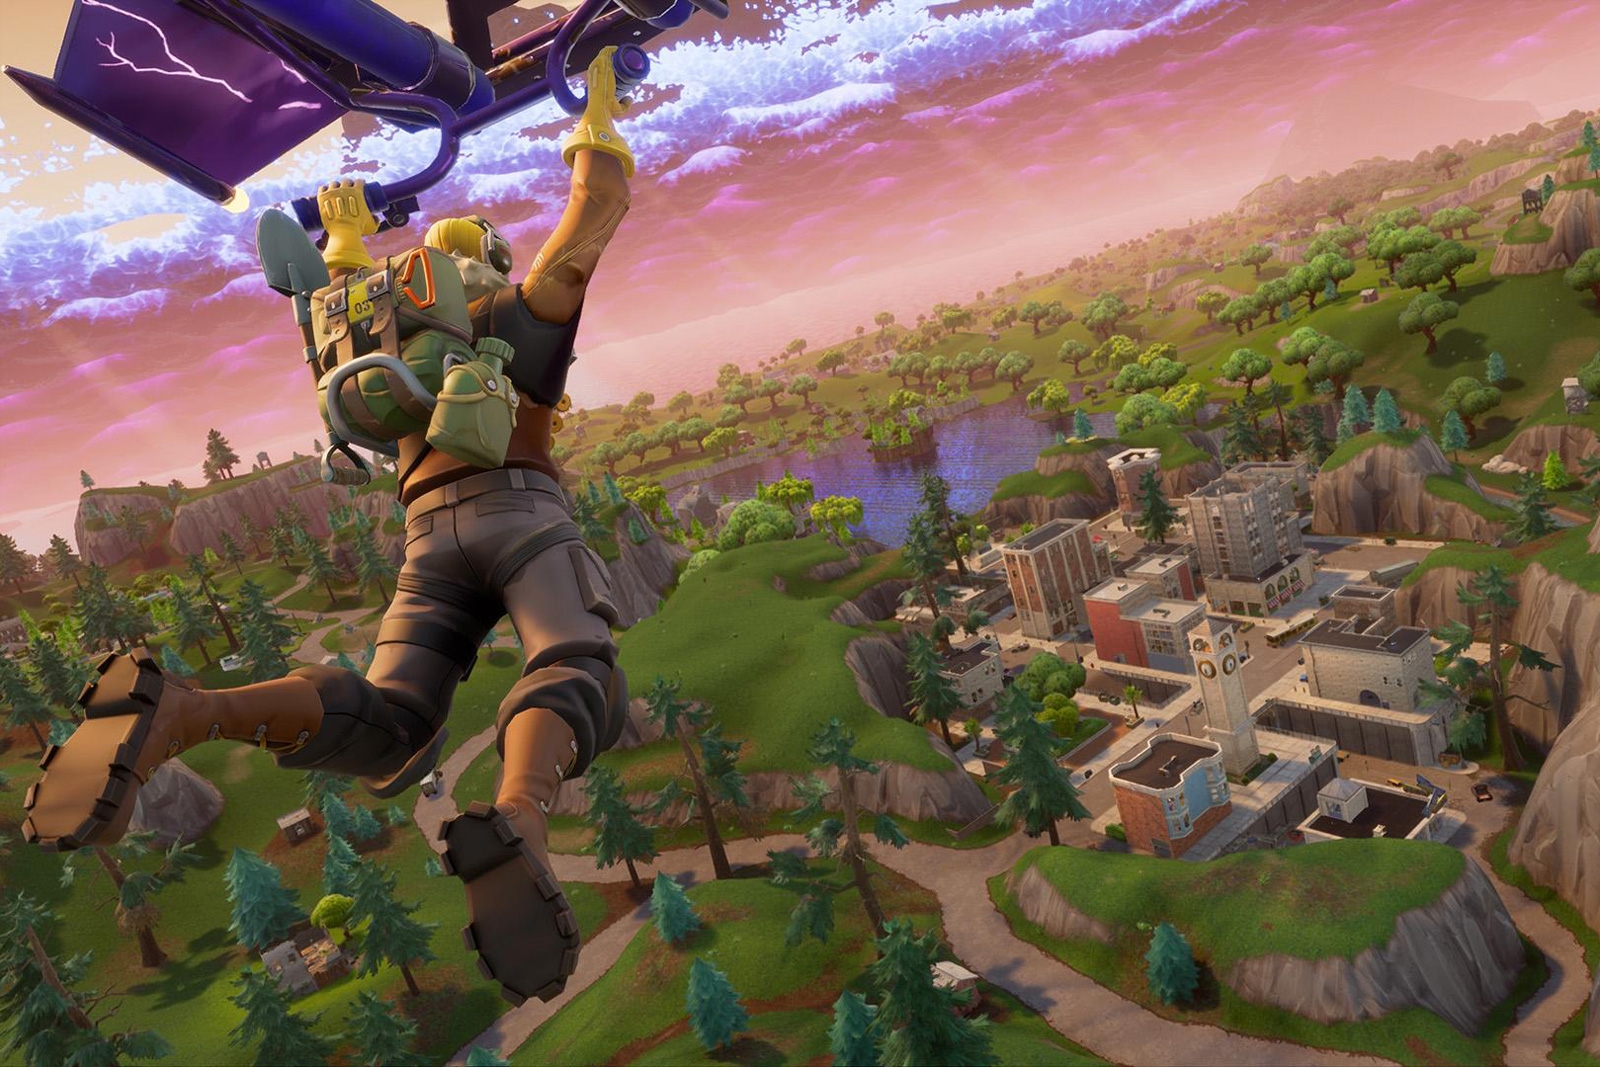 'Fortnite' hot streak grows with a record-breaking YouTube stream | DeviceDaily.com